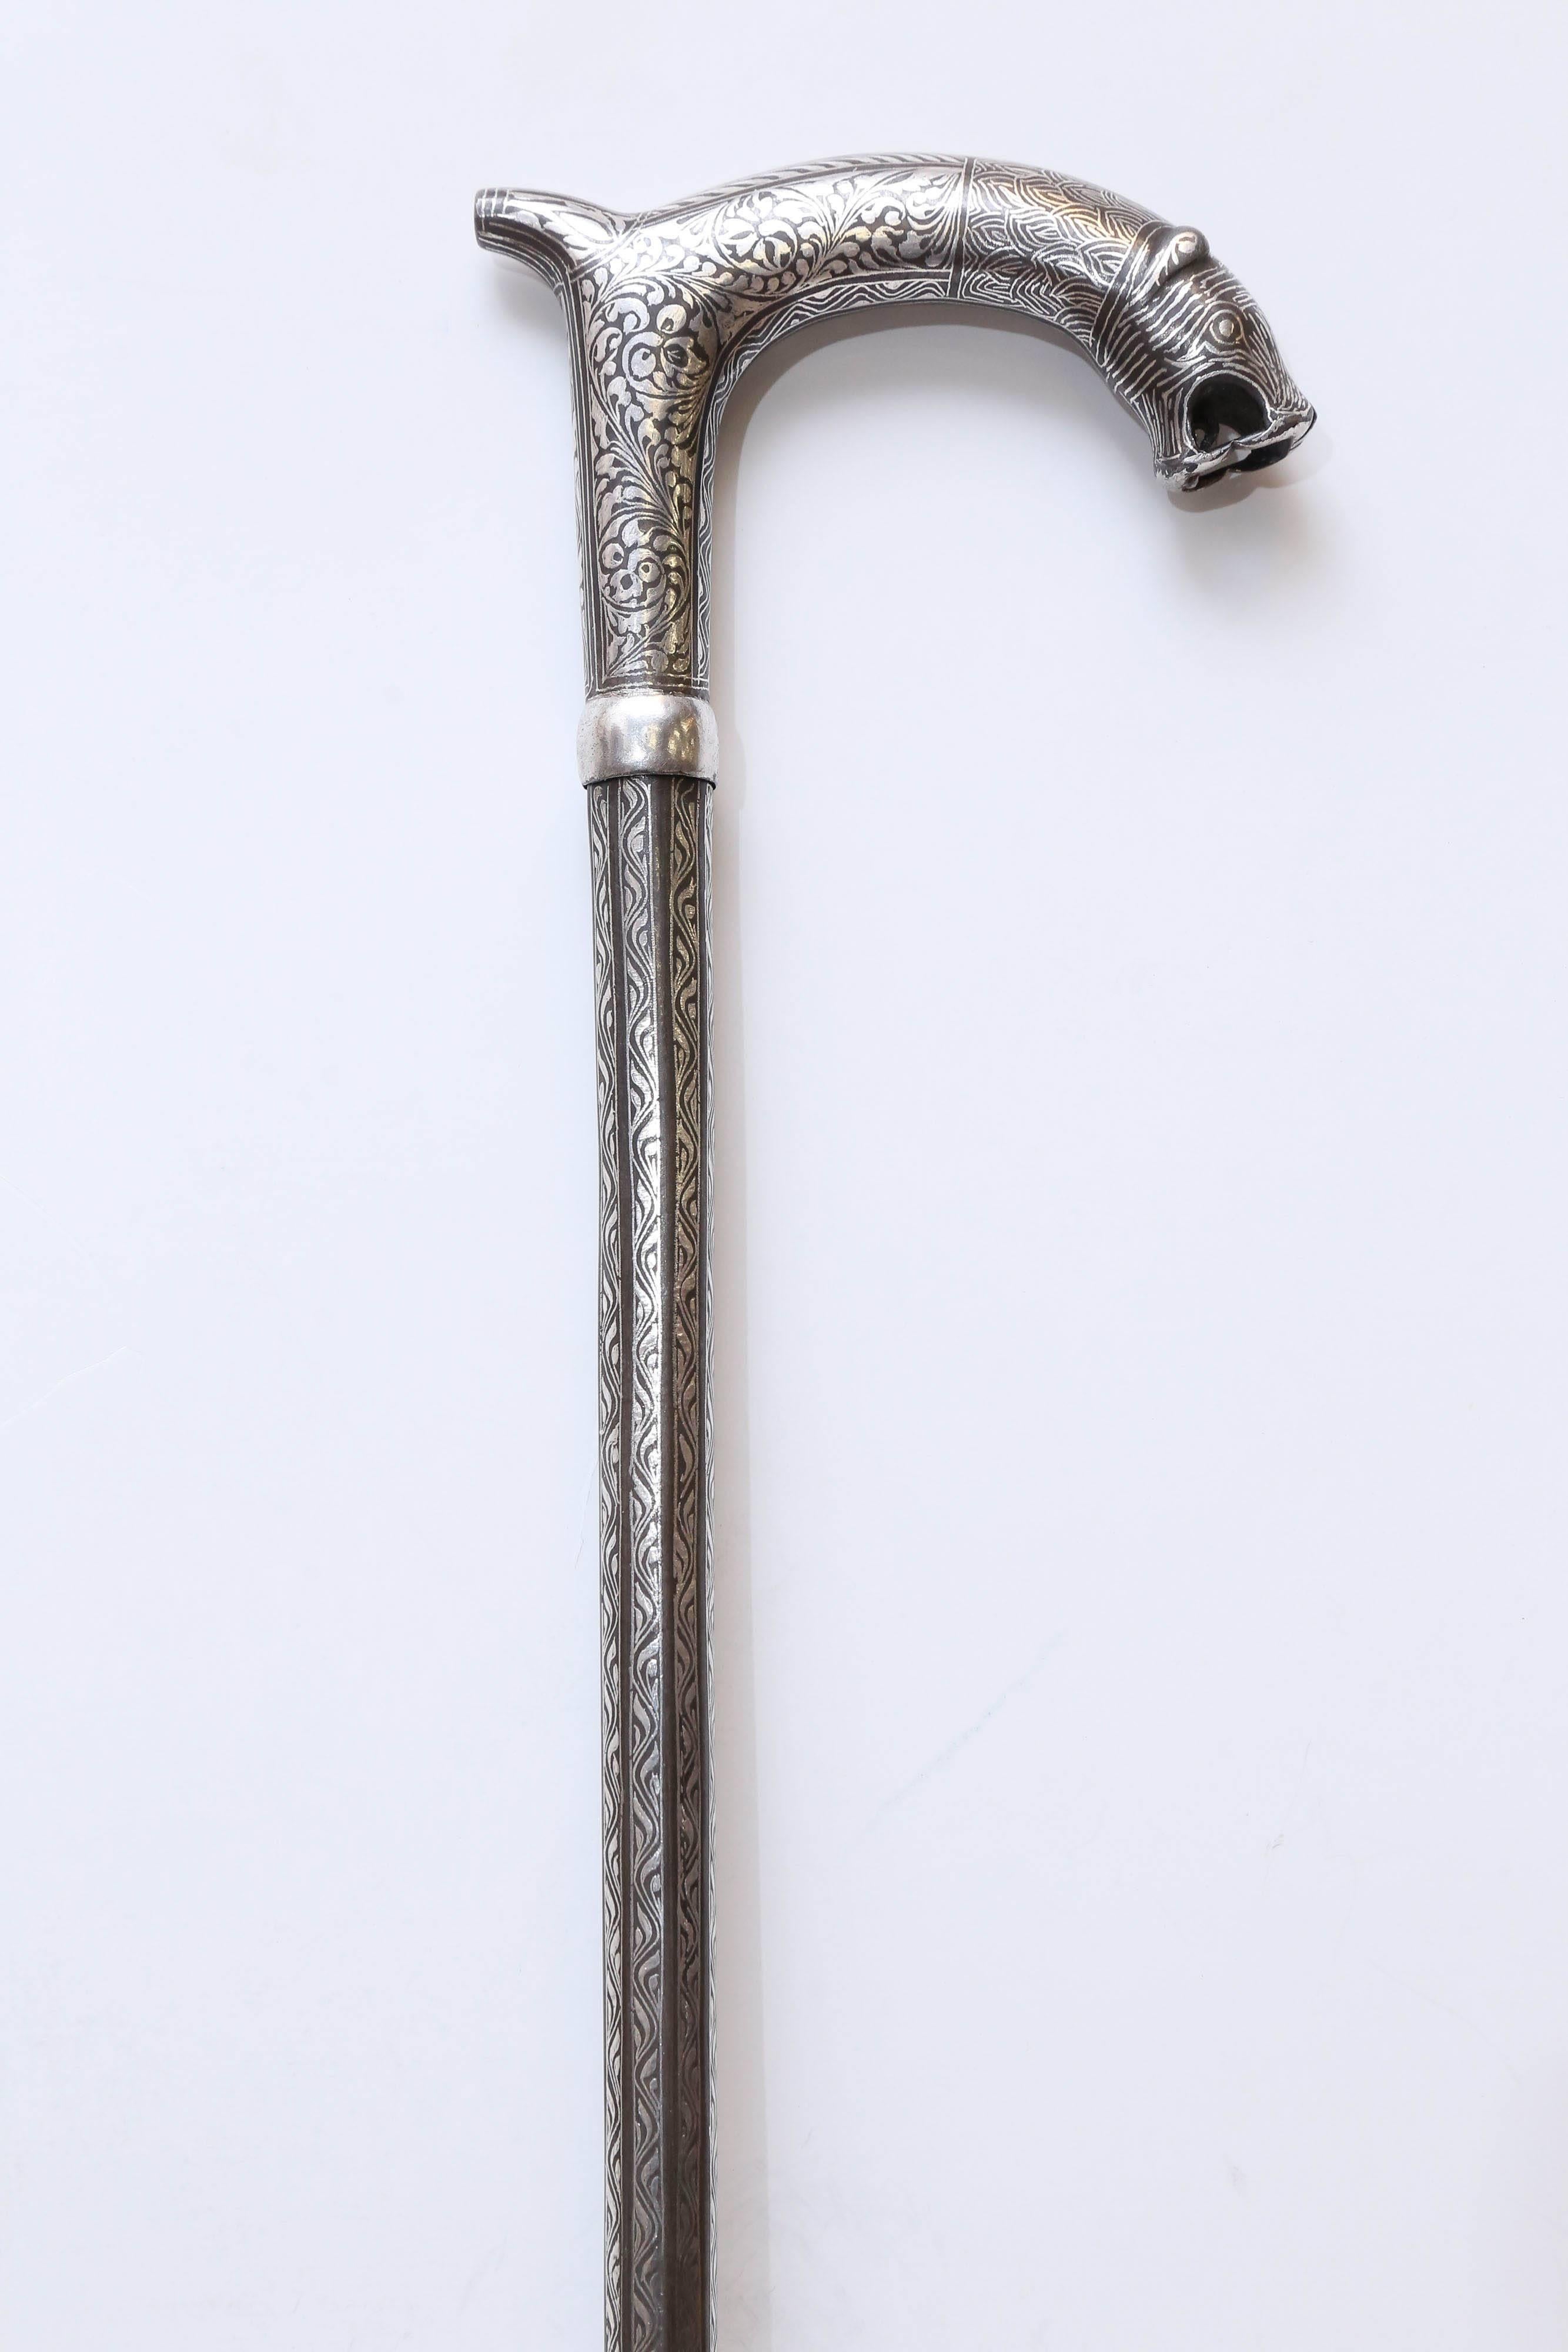 Islamic Early 20th Century Iron Walking Stick with Museum Quality Silver Filigree Work